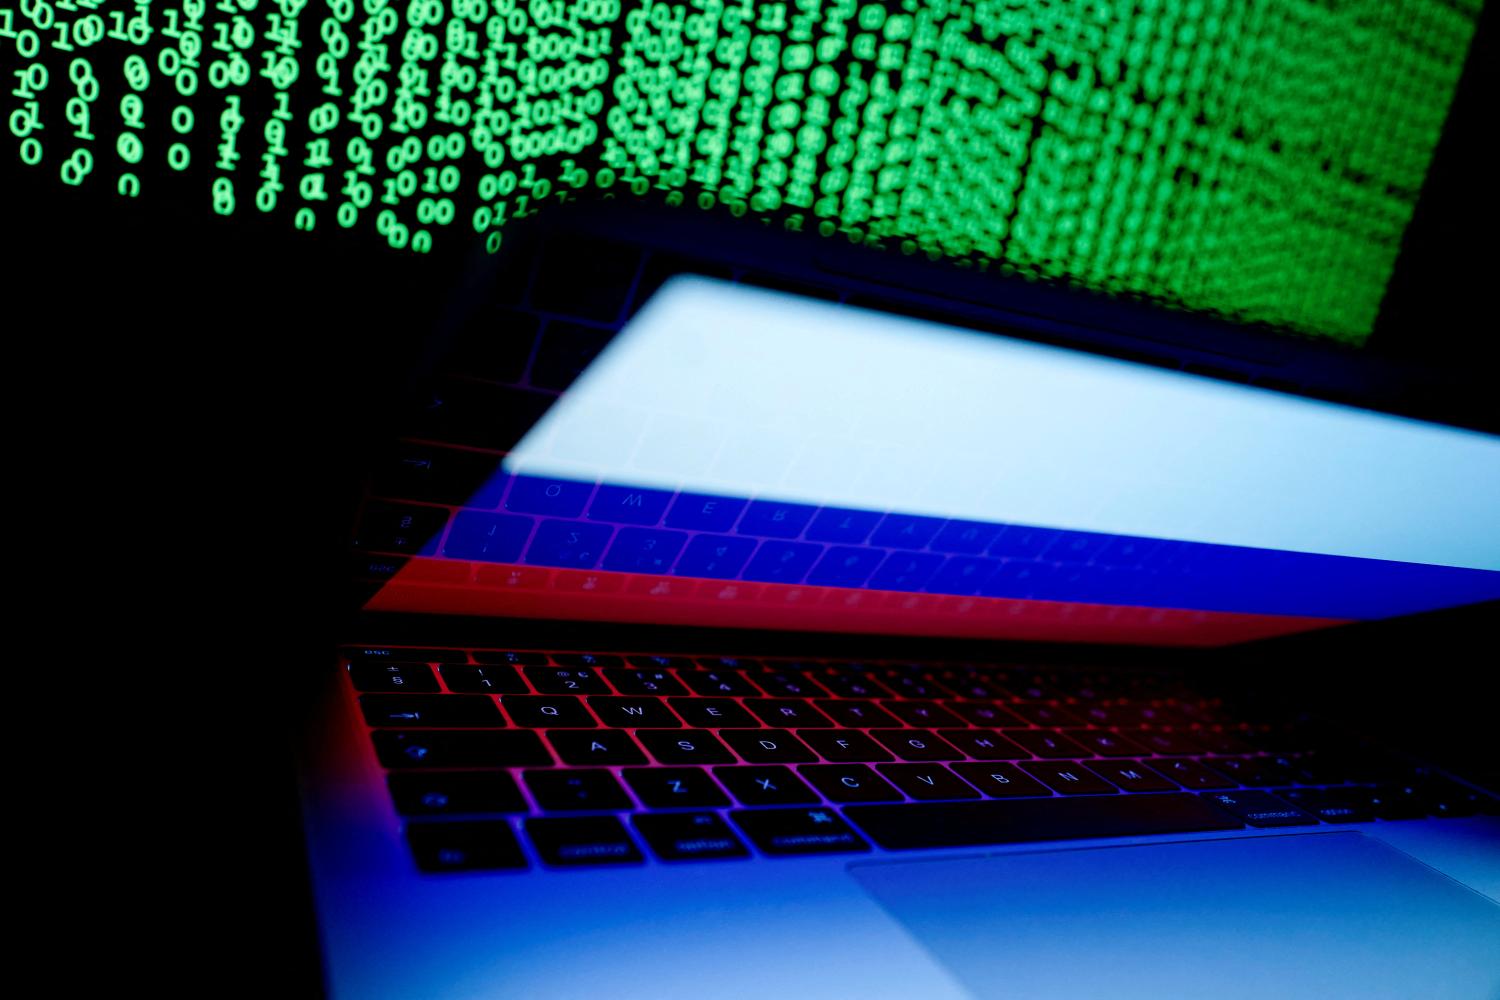 FILE PHOTO: A Russian flag is seen on the laptop screen in front of a computer screen on which cyber code is displayed, in this illustration picture taken March 2, 2018. REUTERS/Kacper Pempel/Illustration/File Photo